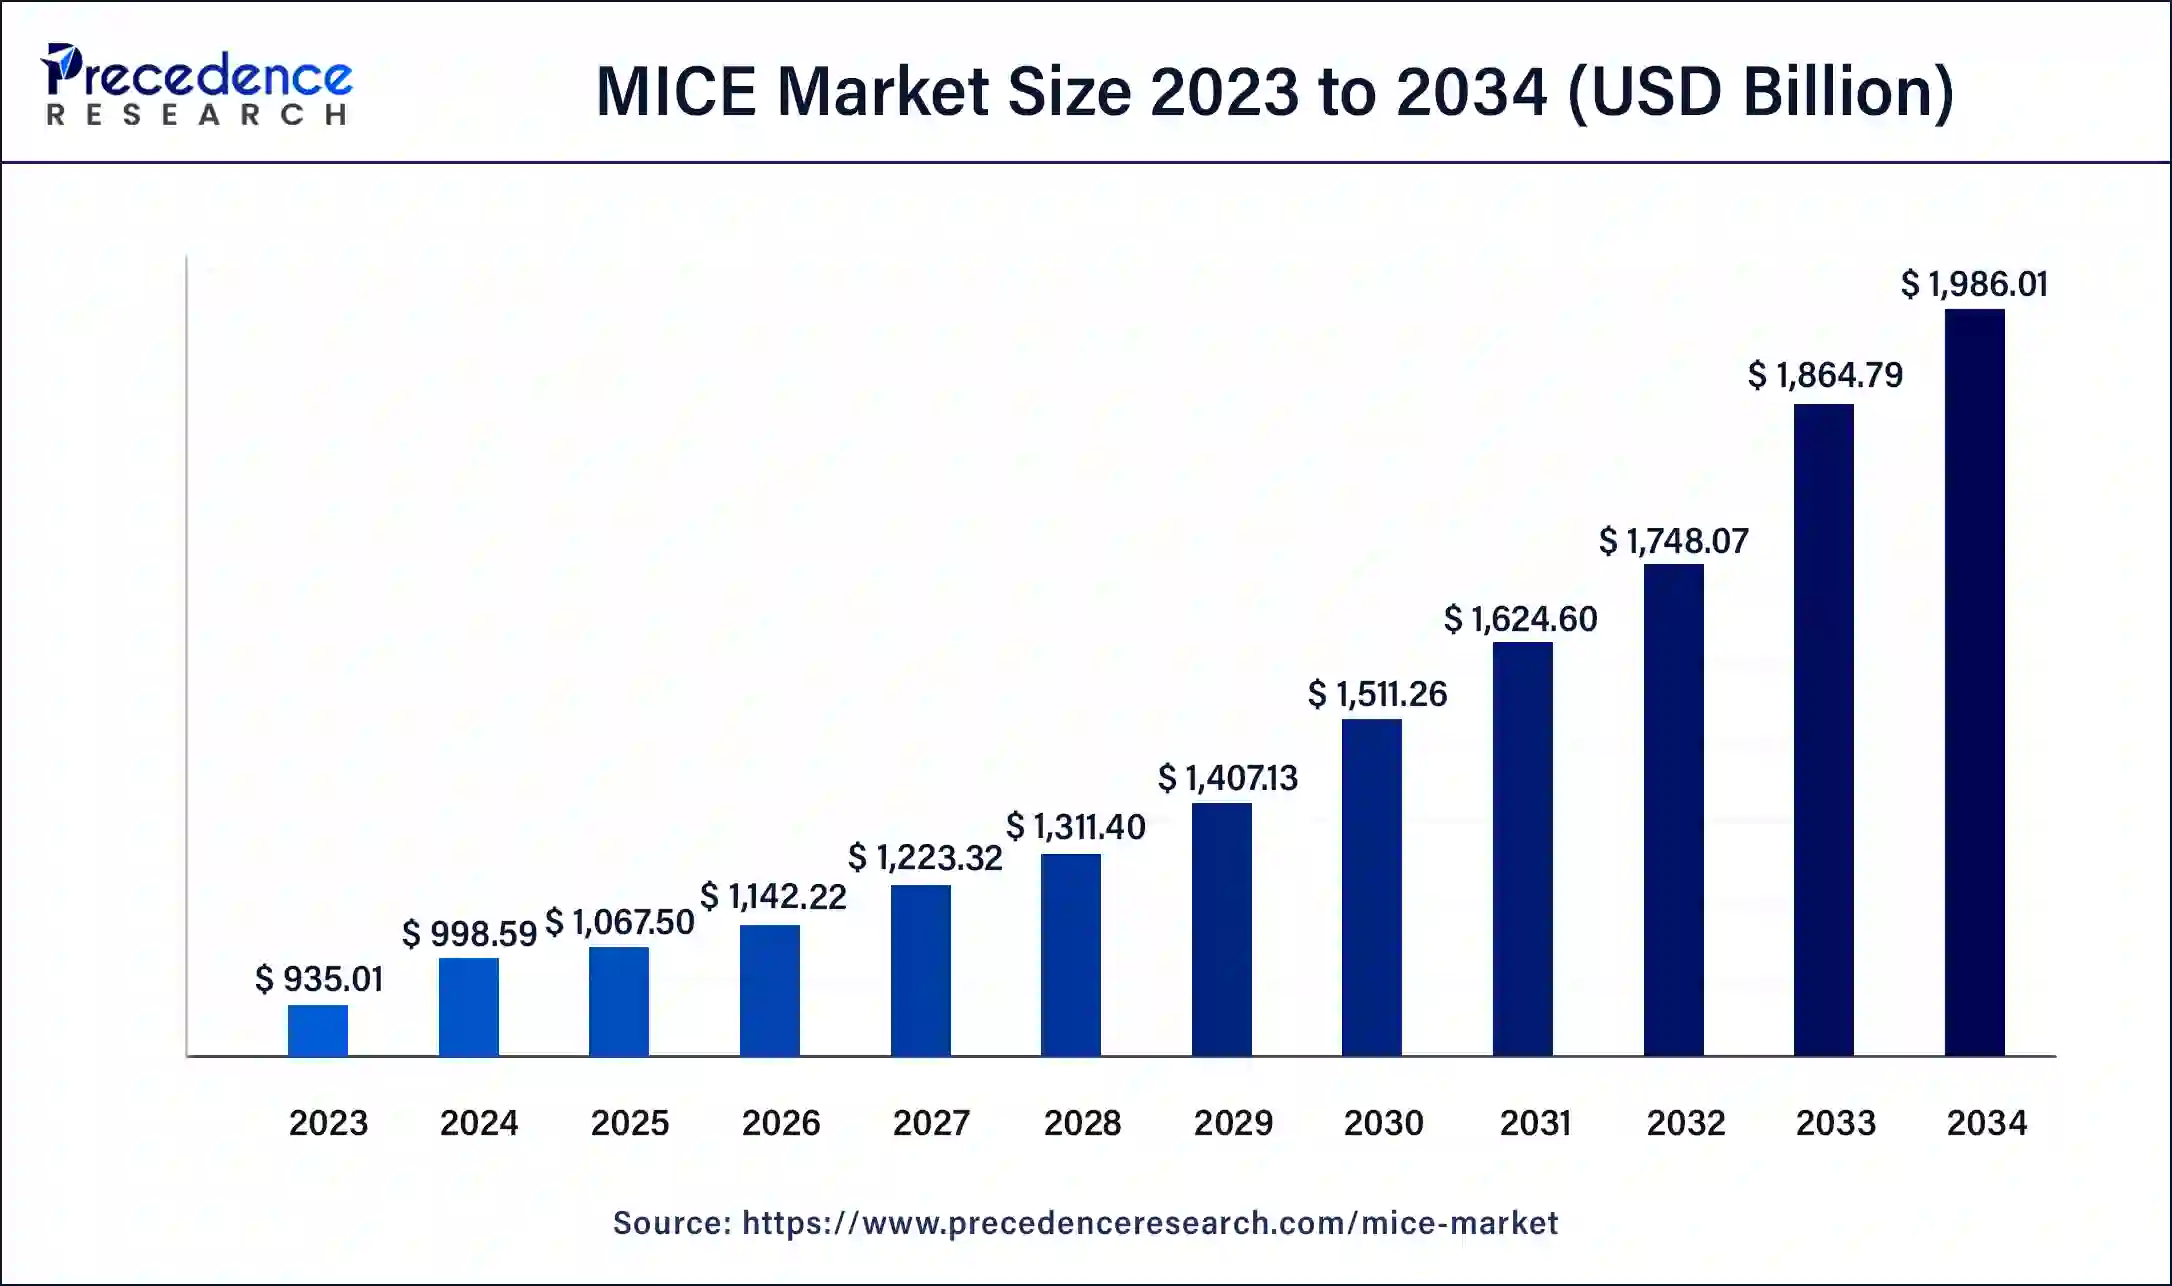 MICE Market Size 2024 To 2034